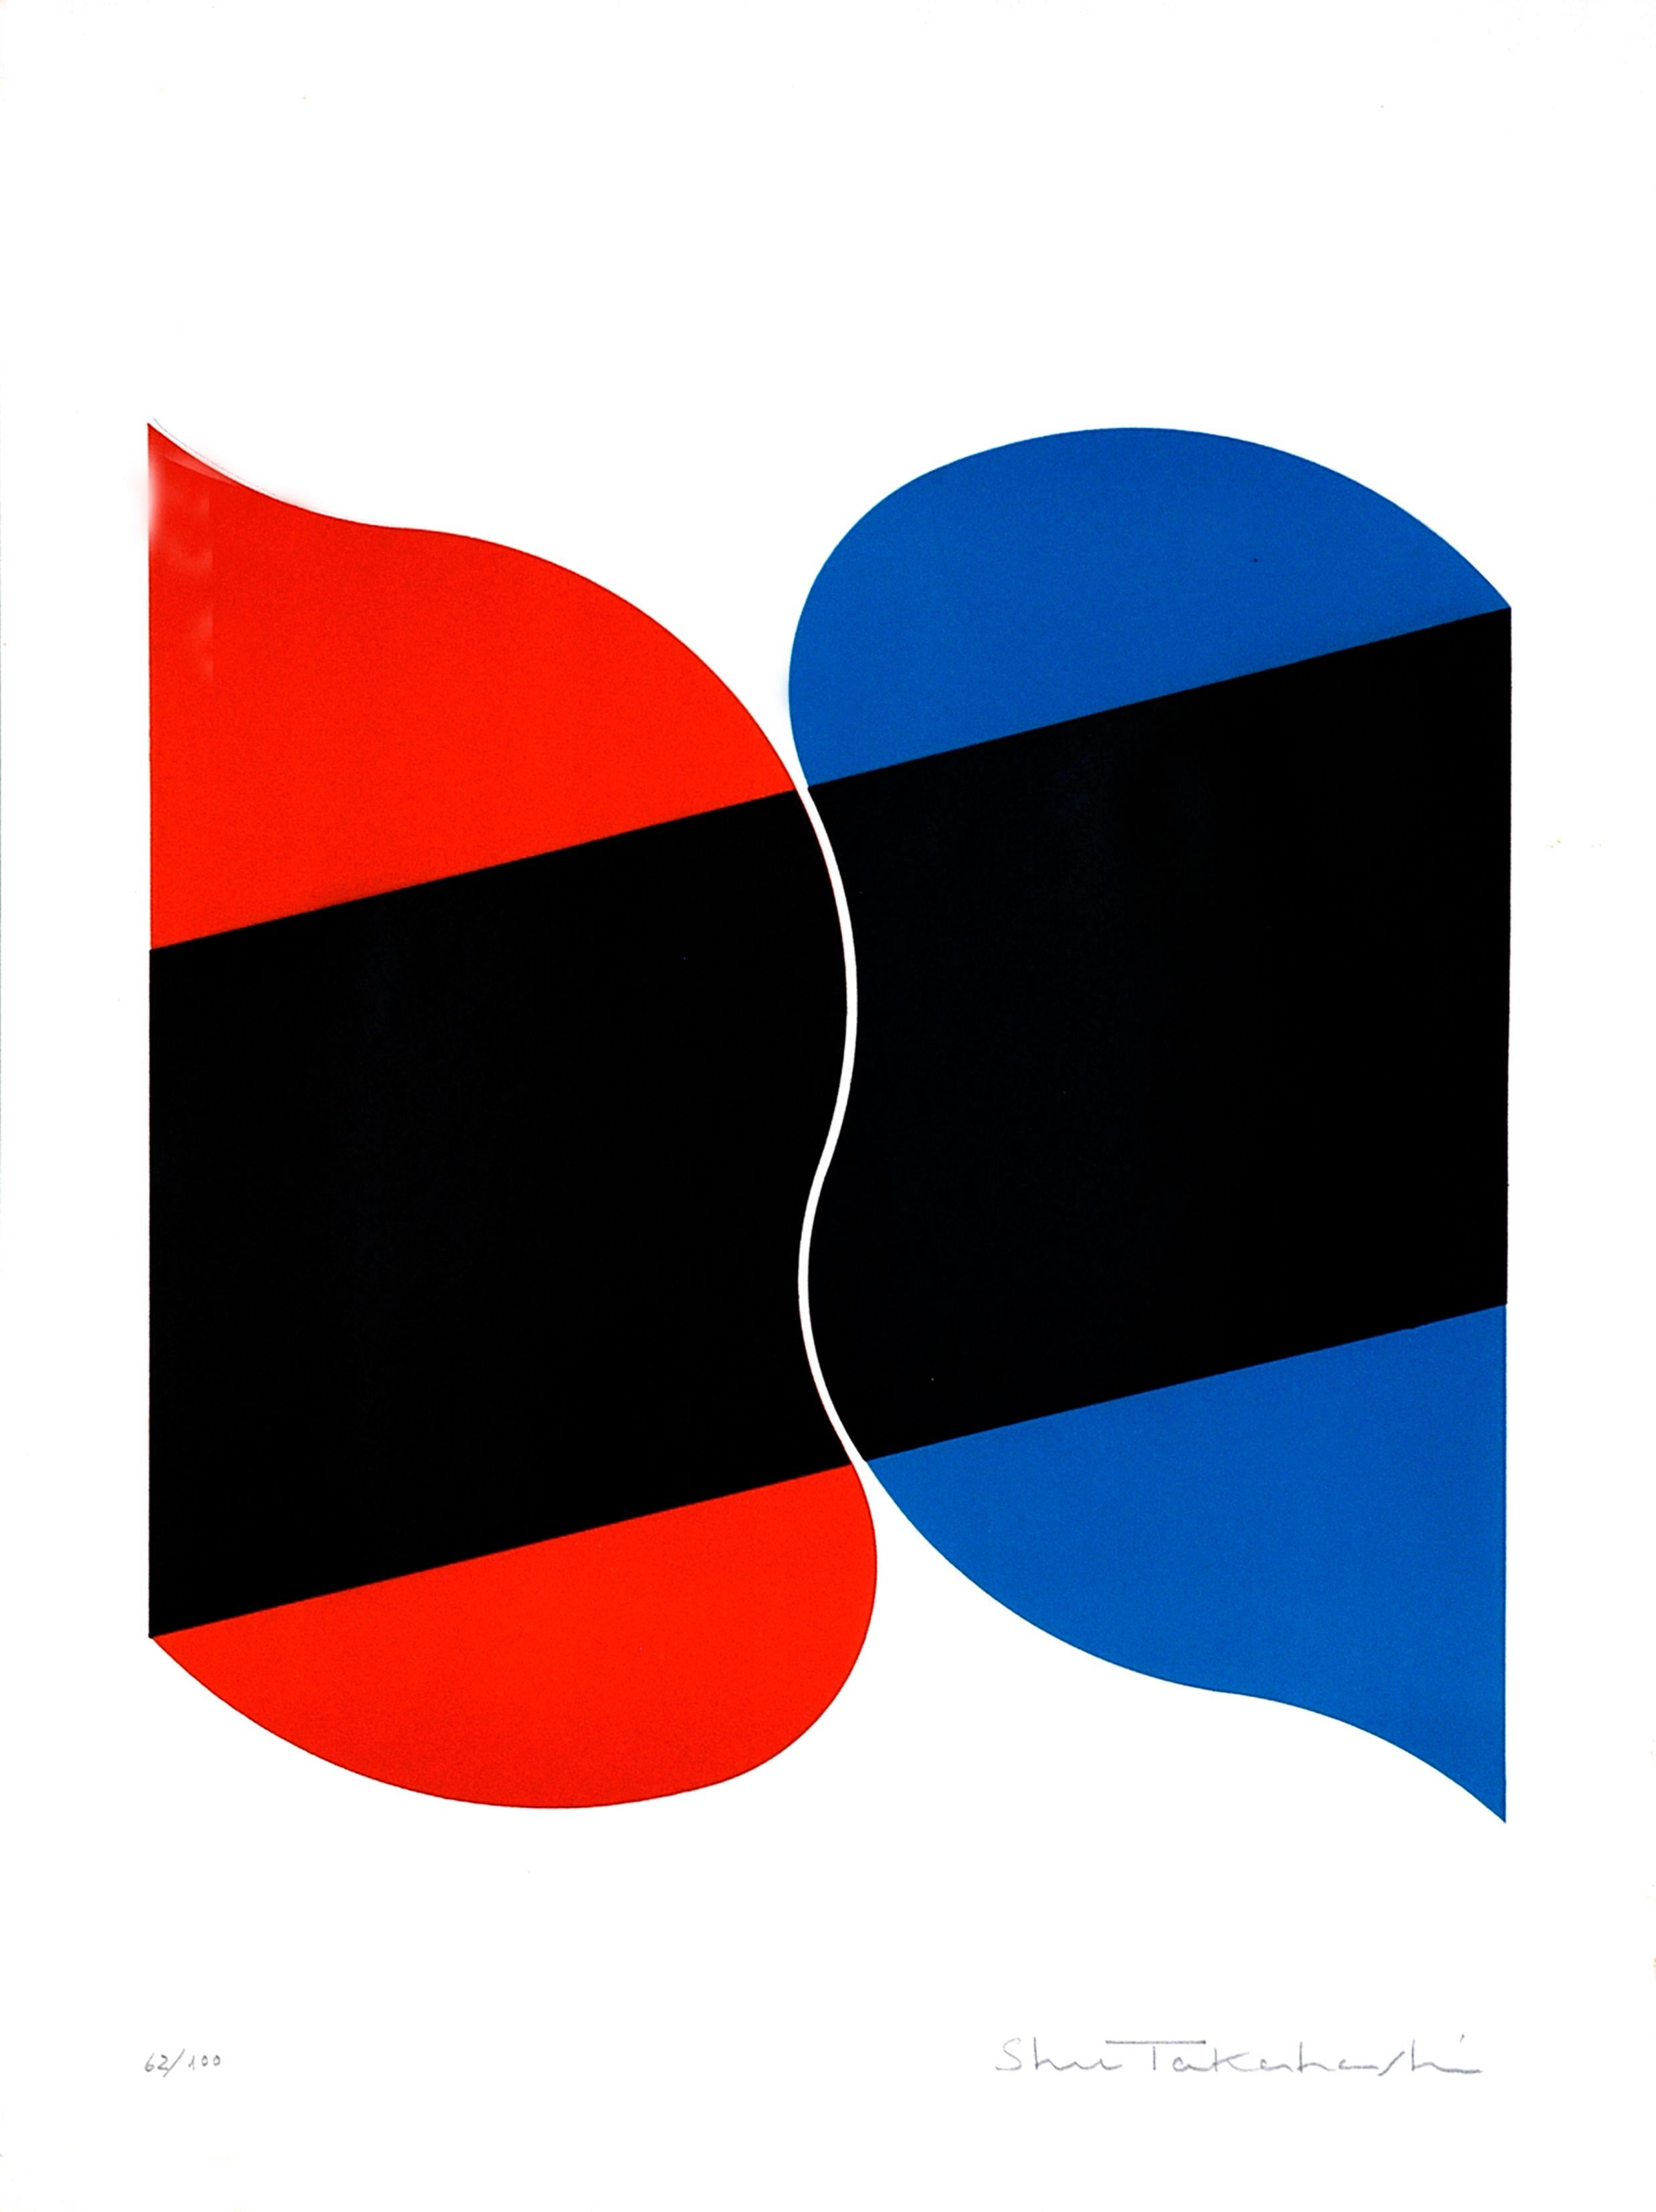 Leda is a beautiful colorful print realized by Shu Takahashi.

This is a hand-signed edition of 100 prints. Its technique is chalcography and serigraph.

This very simple abstract composition presents two colors (blue and red) crossed by a black